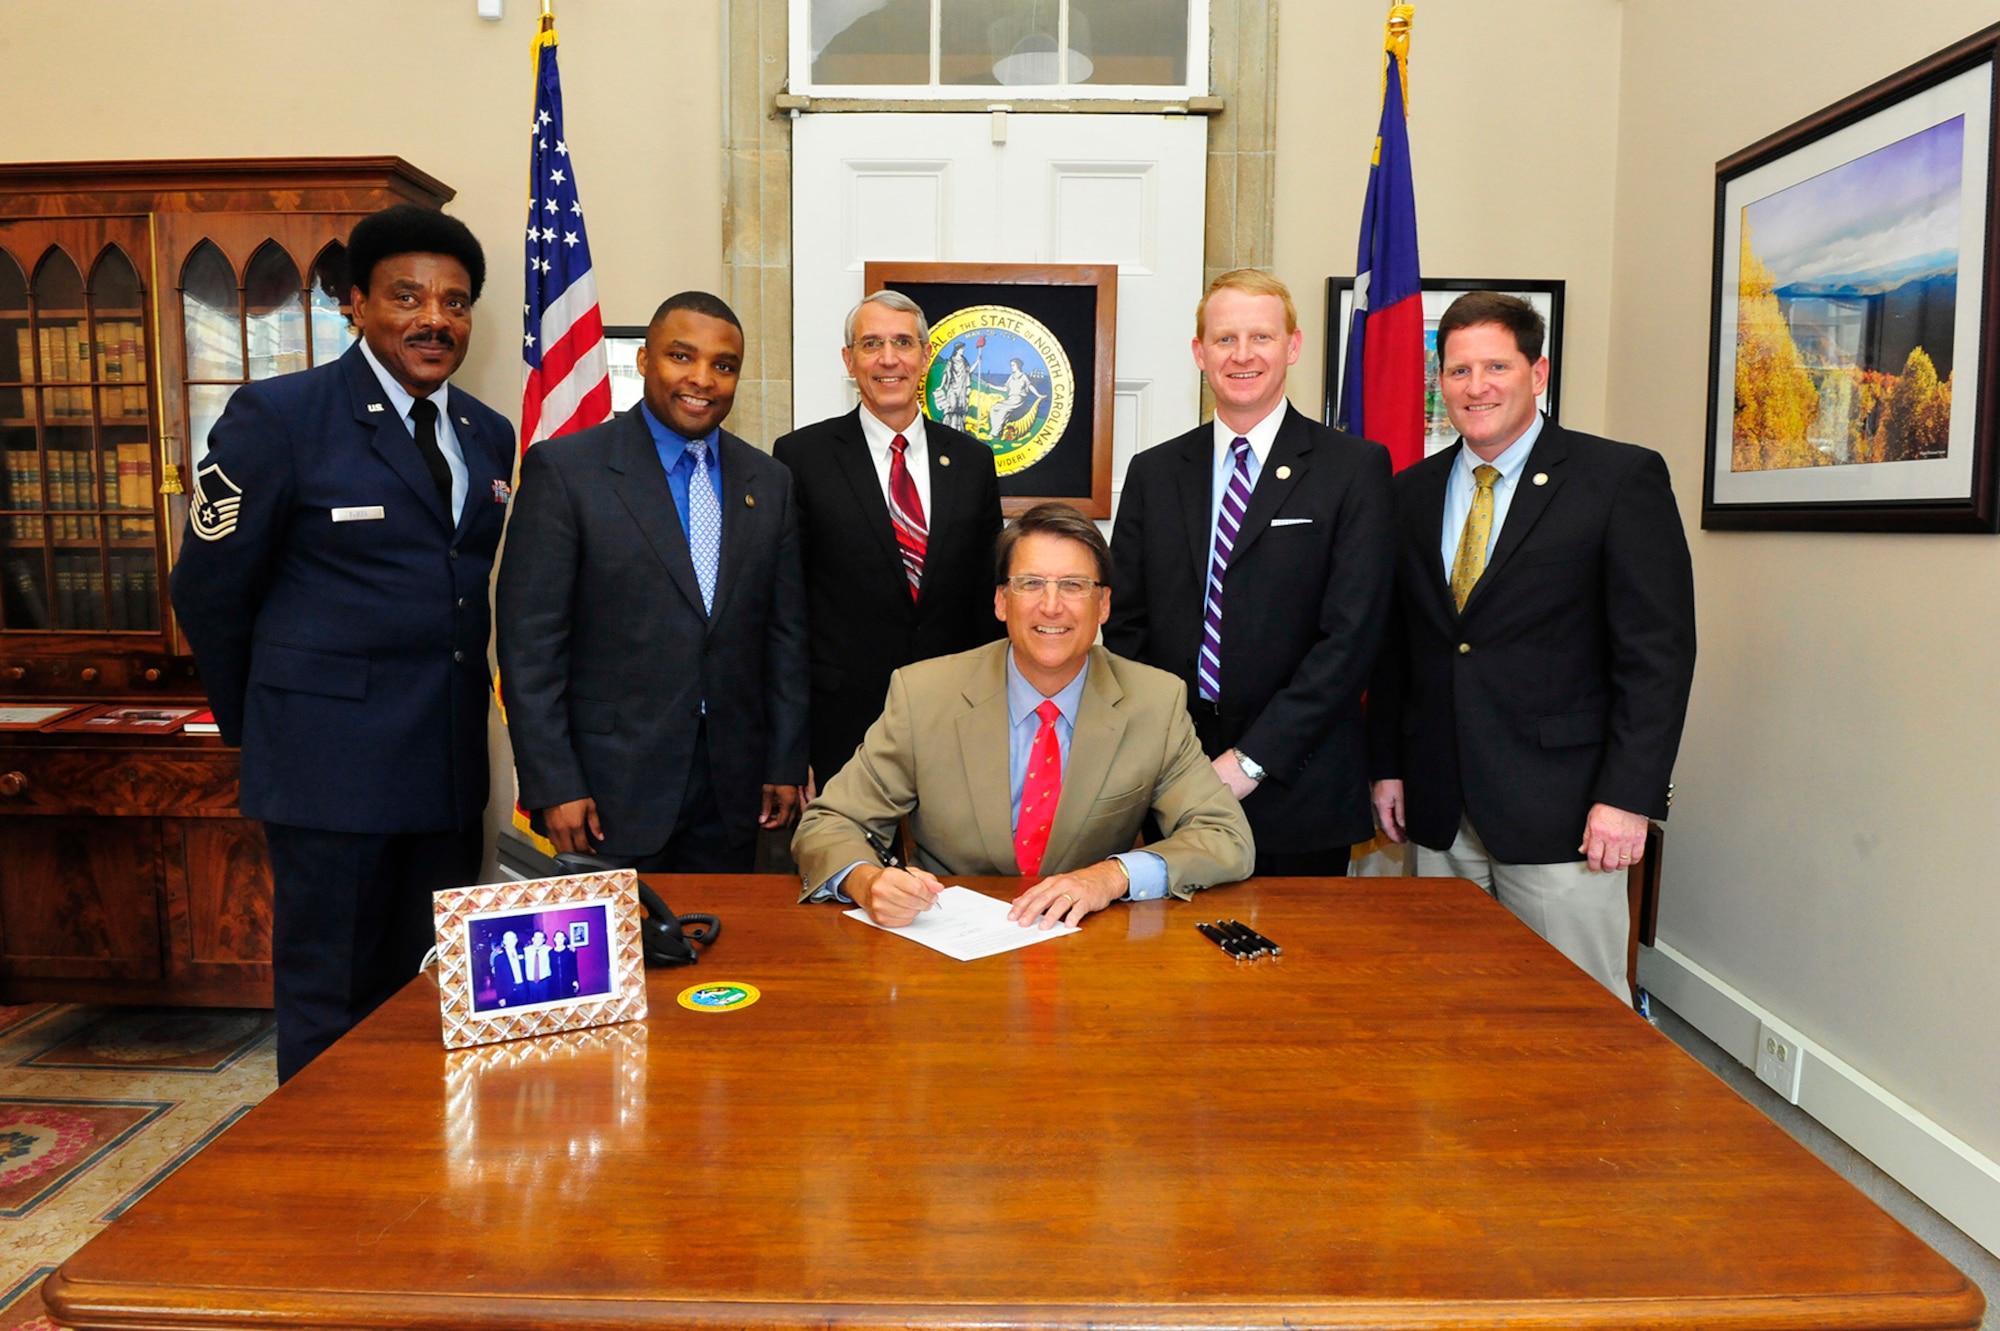 Col. J. Chris Whitmire, an Emergency Preparedness Liaison Officer and member of the North Carolina House of Representatives, far right, is pictured with fellow North Carolina Lawmakers and Gov. Pat McCrory for the signing of the Brass to Class act, which streamlines the process veterans must follow to transition into public classrooms as teachers by ensuring they are granted credit for their relevant experience, formal certifications and training, leadership roles and formal education. Whitmire was a primary sponsor of the bill. (Courtesy photo)   